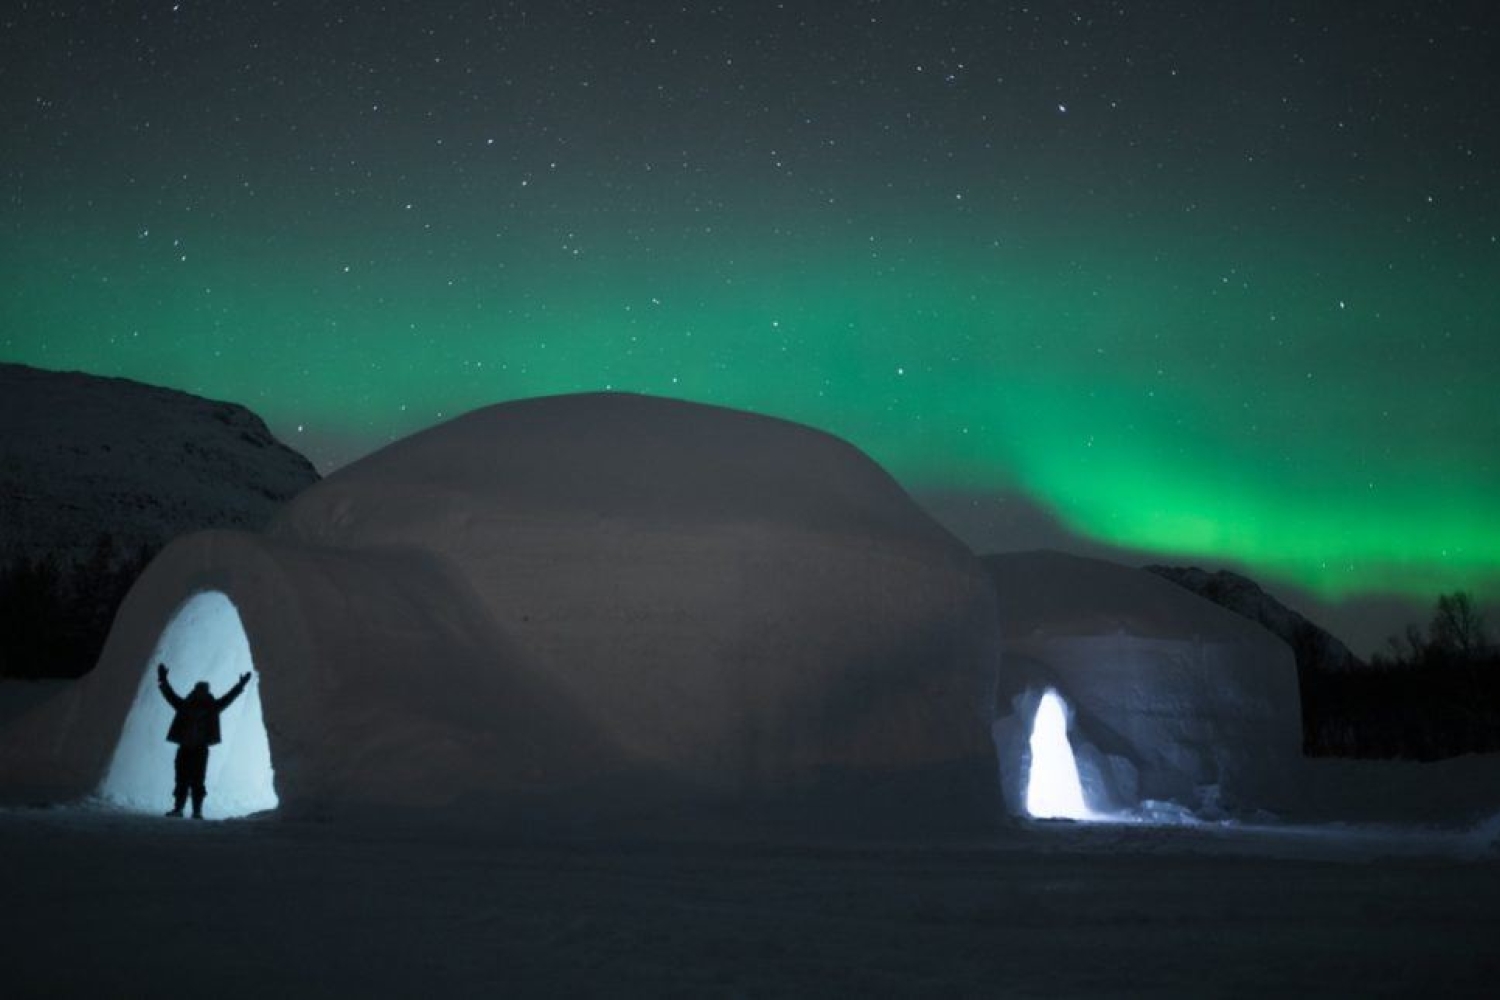 Ice Domes and Northern Lights